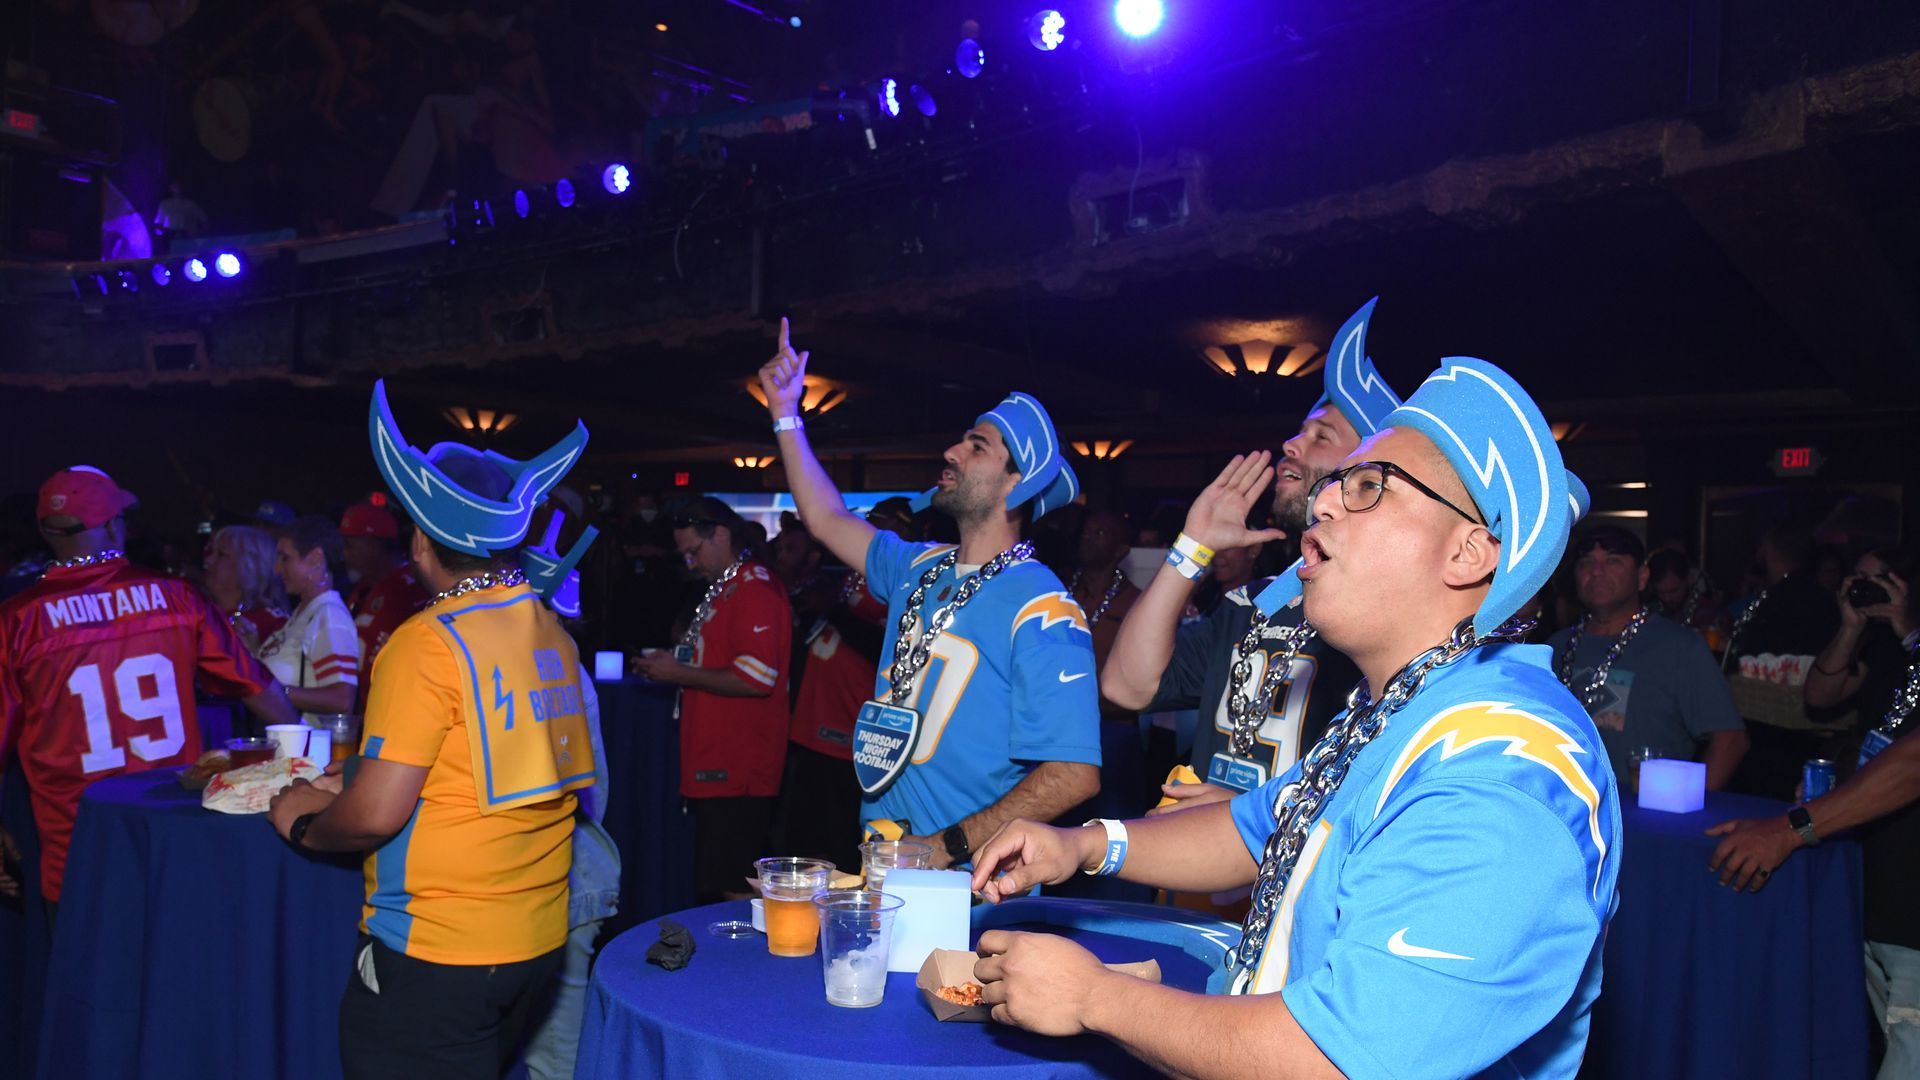 Fans at Amazon's Thursday Night Football party on Sept. 15 in Los Angeles